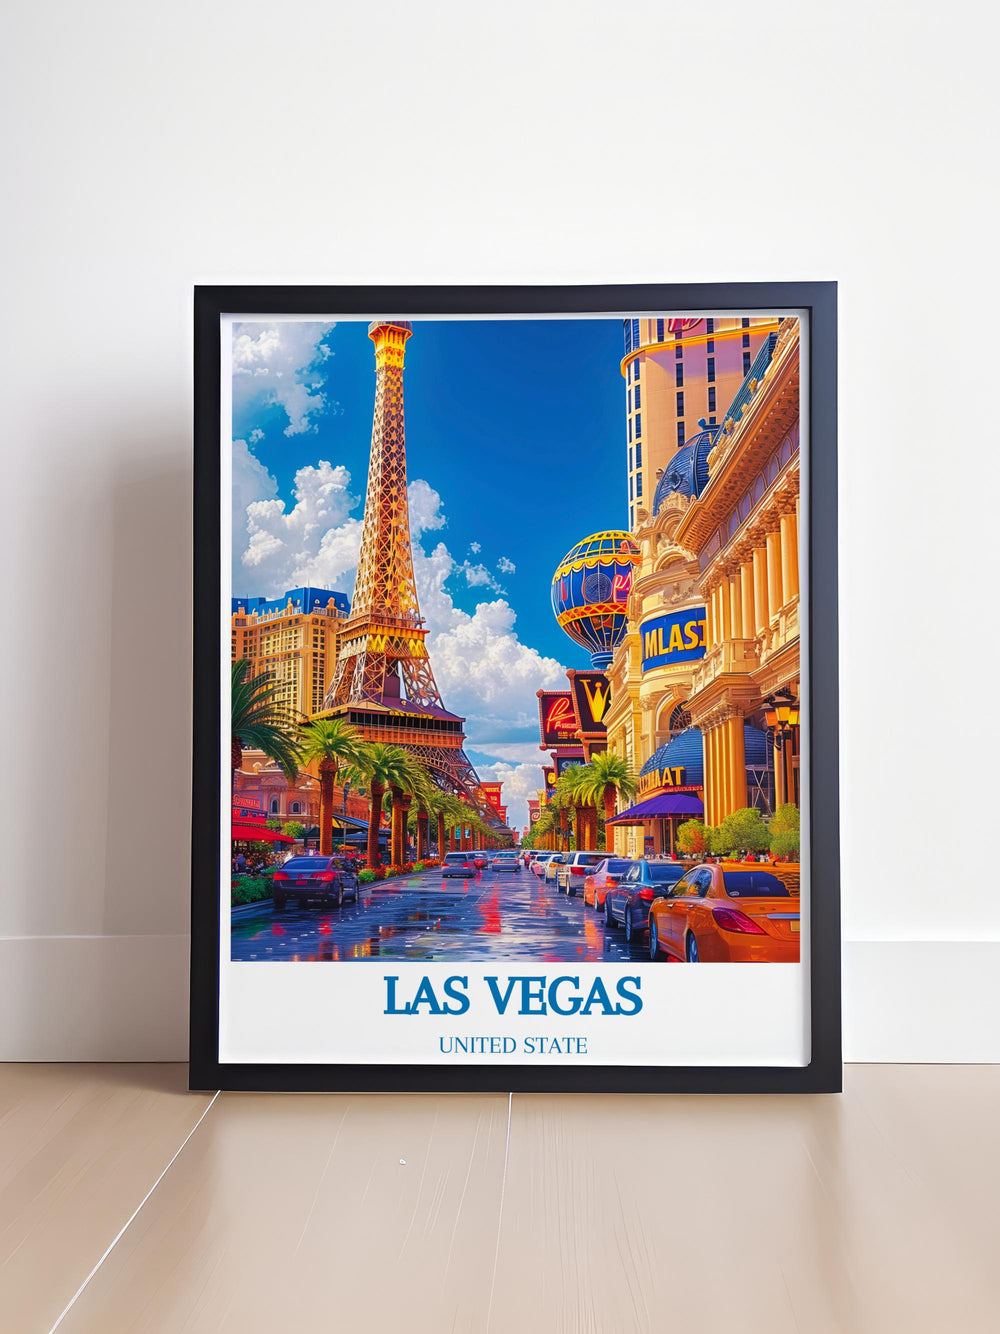 Home decor piece featuring a stunning view of the Las Vegas skyline at night, ideal for those who love urban energy.